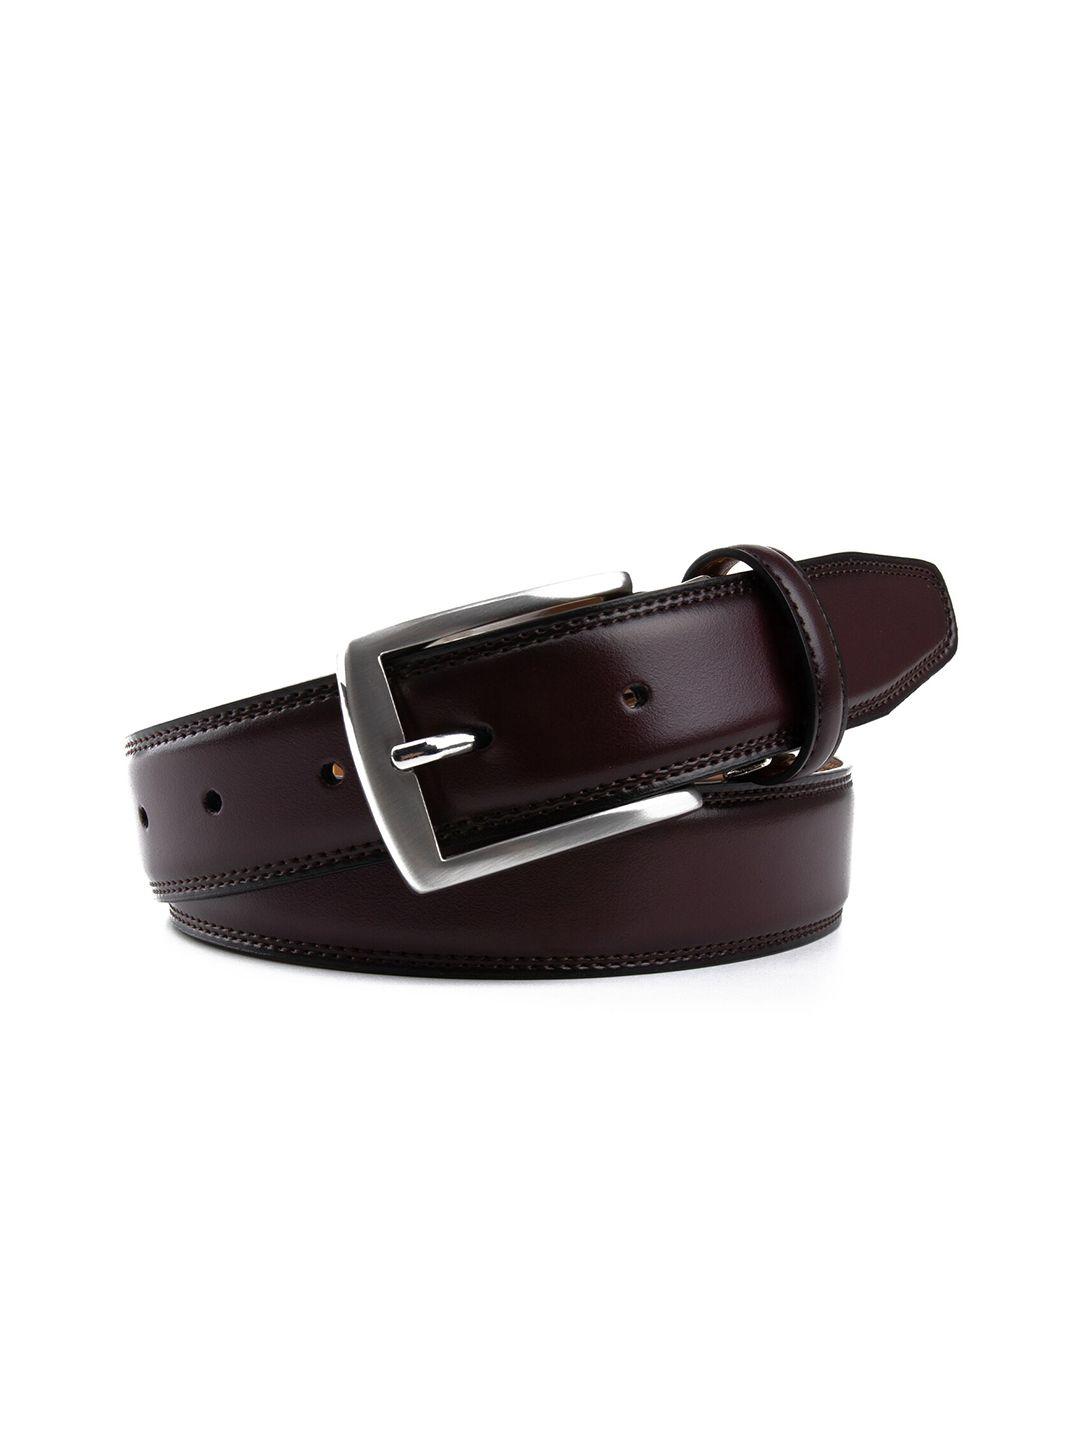 contacts men coffee brown leather belt